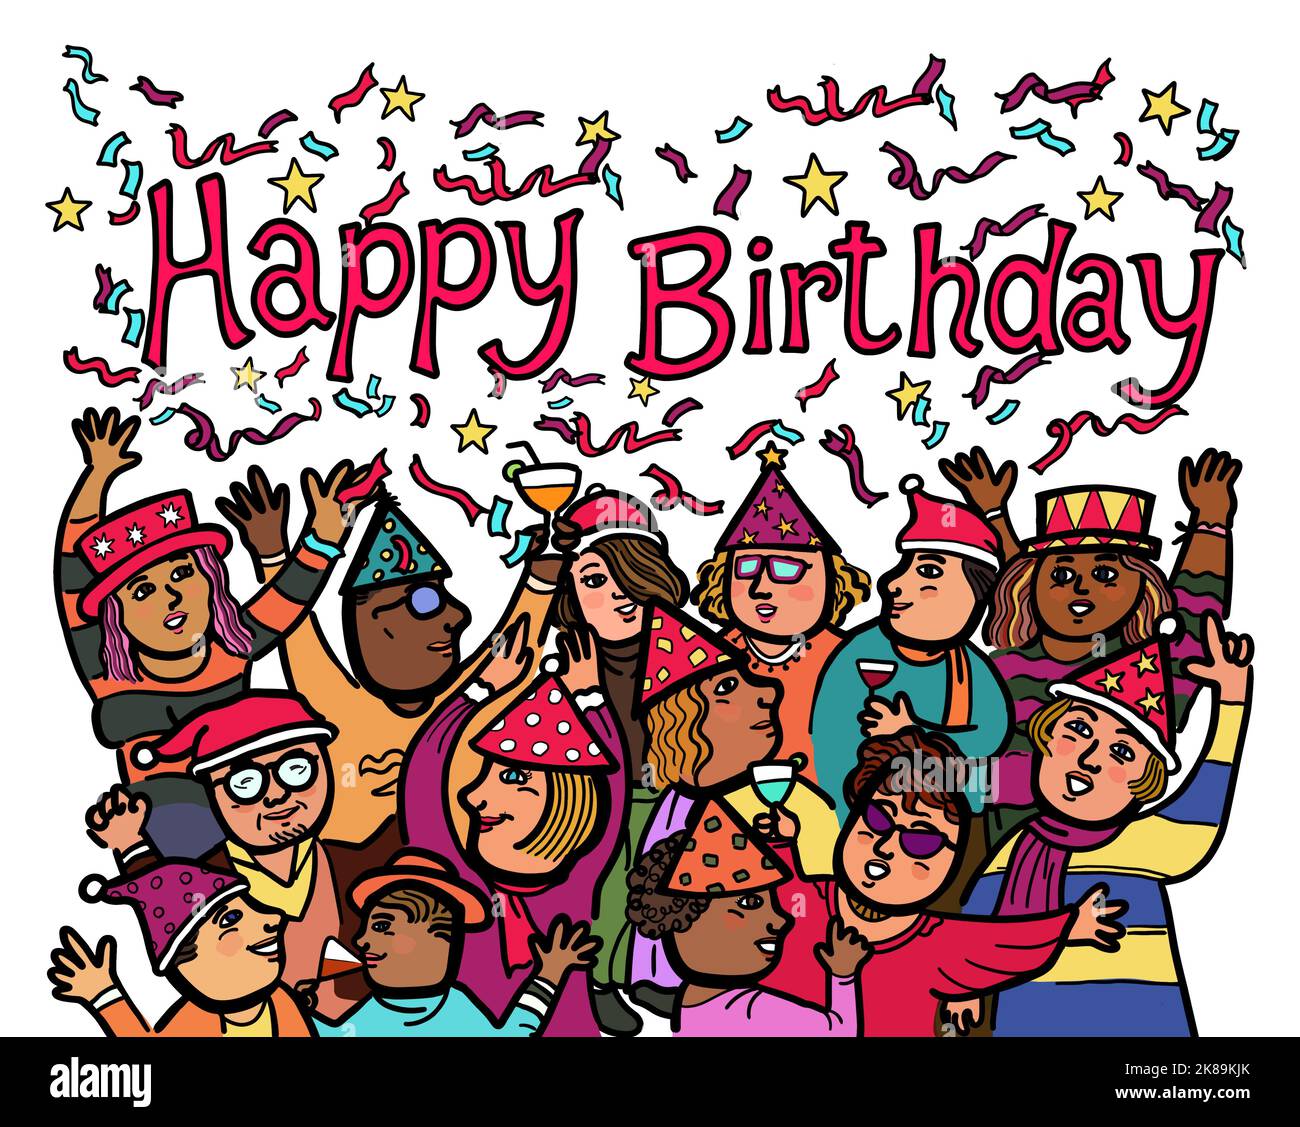 Illustration drawing of multi-ethnic and mixed age group of people celebrate birthday party. Happy birthday celebration together. Stock Photo